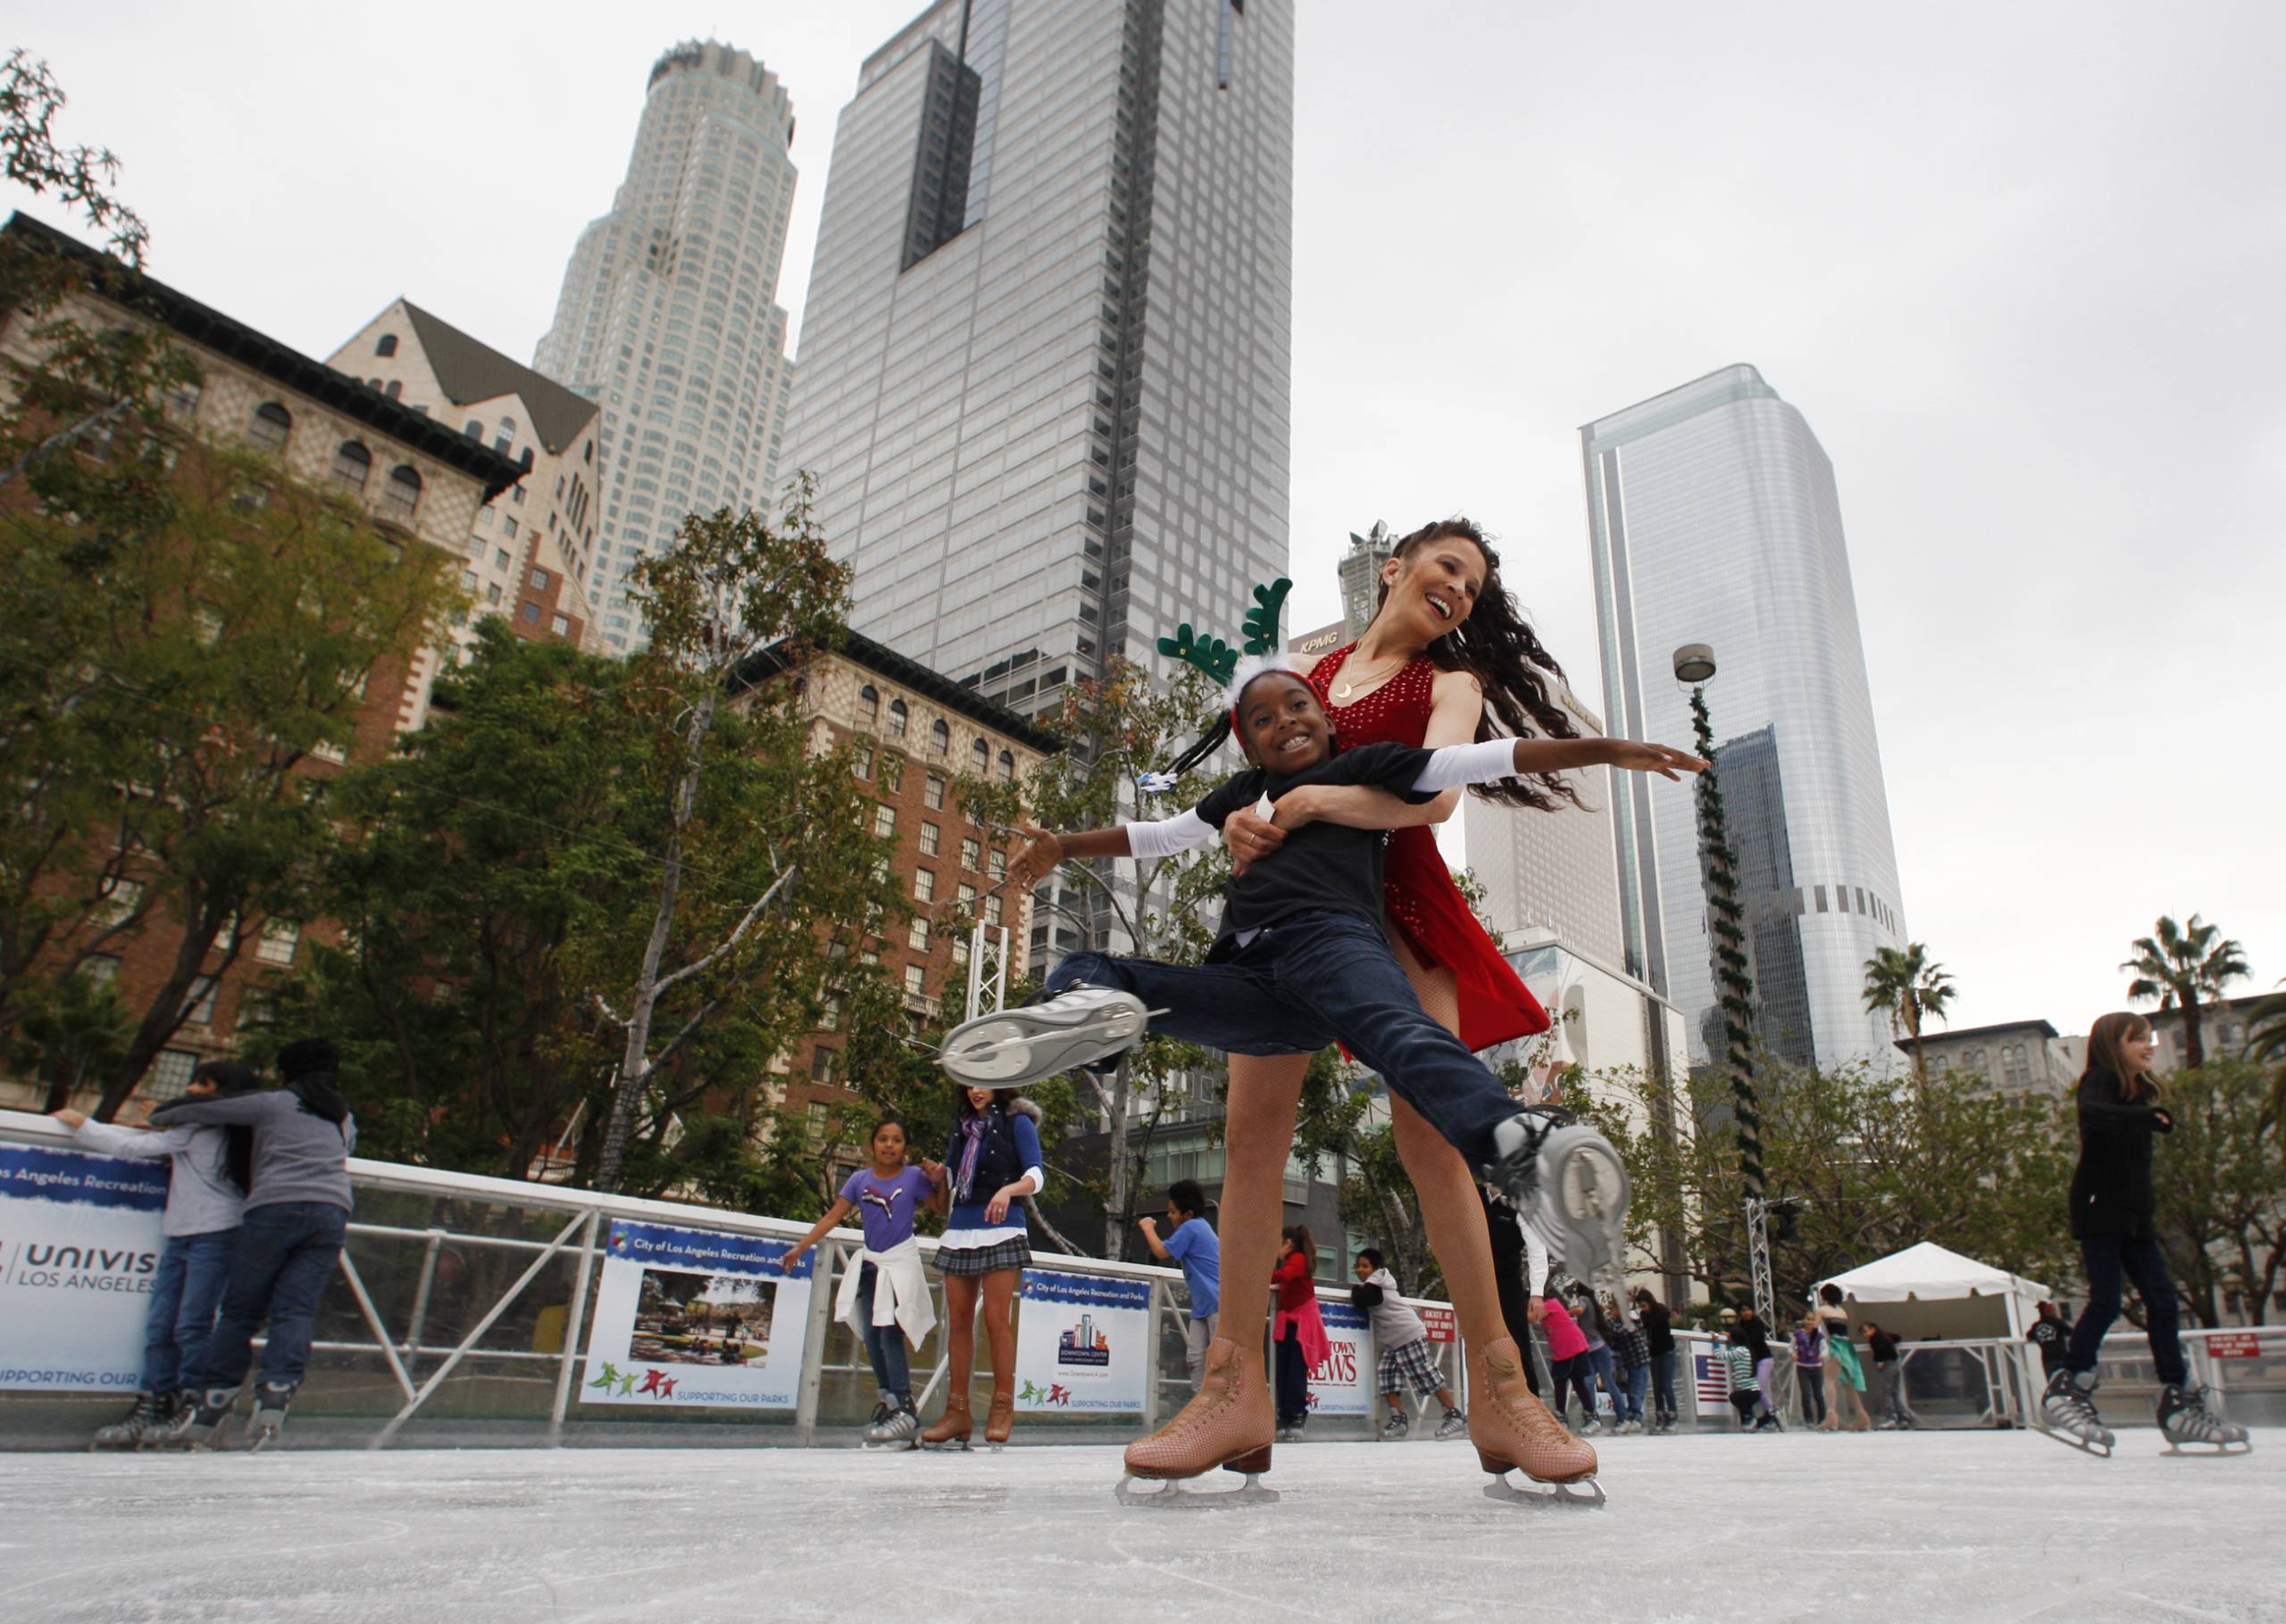 A female figure skater wearing a sparkly, red outfit spins around a child wearing a navy blue school uniform as they smile together on an ice rink outdoors with buildings and skyscrapers in the background.